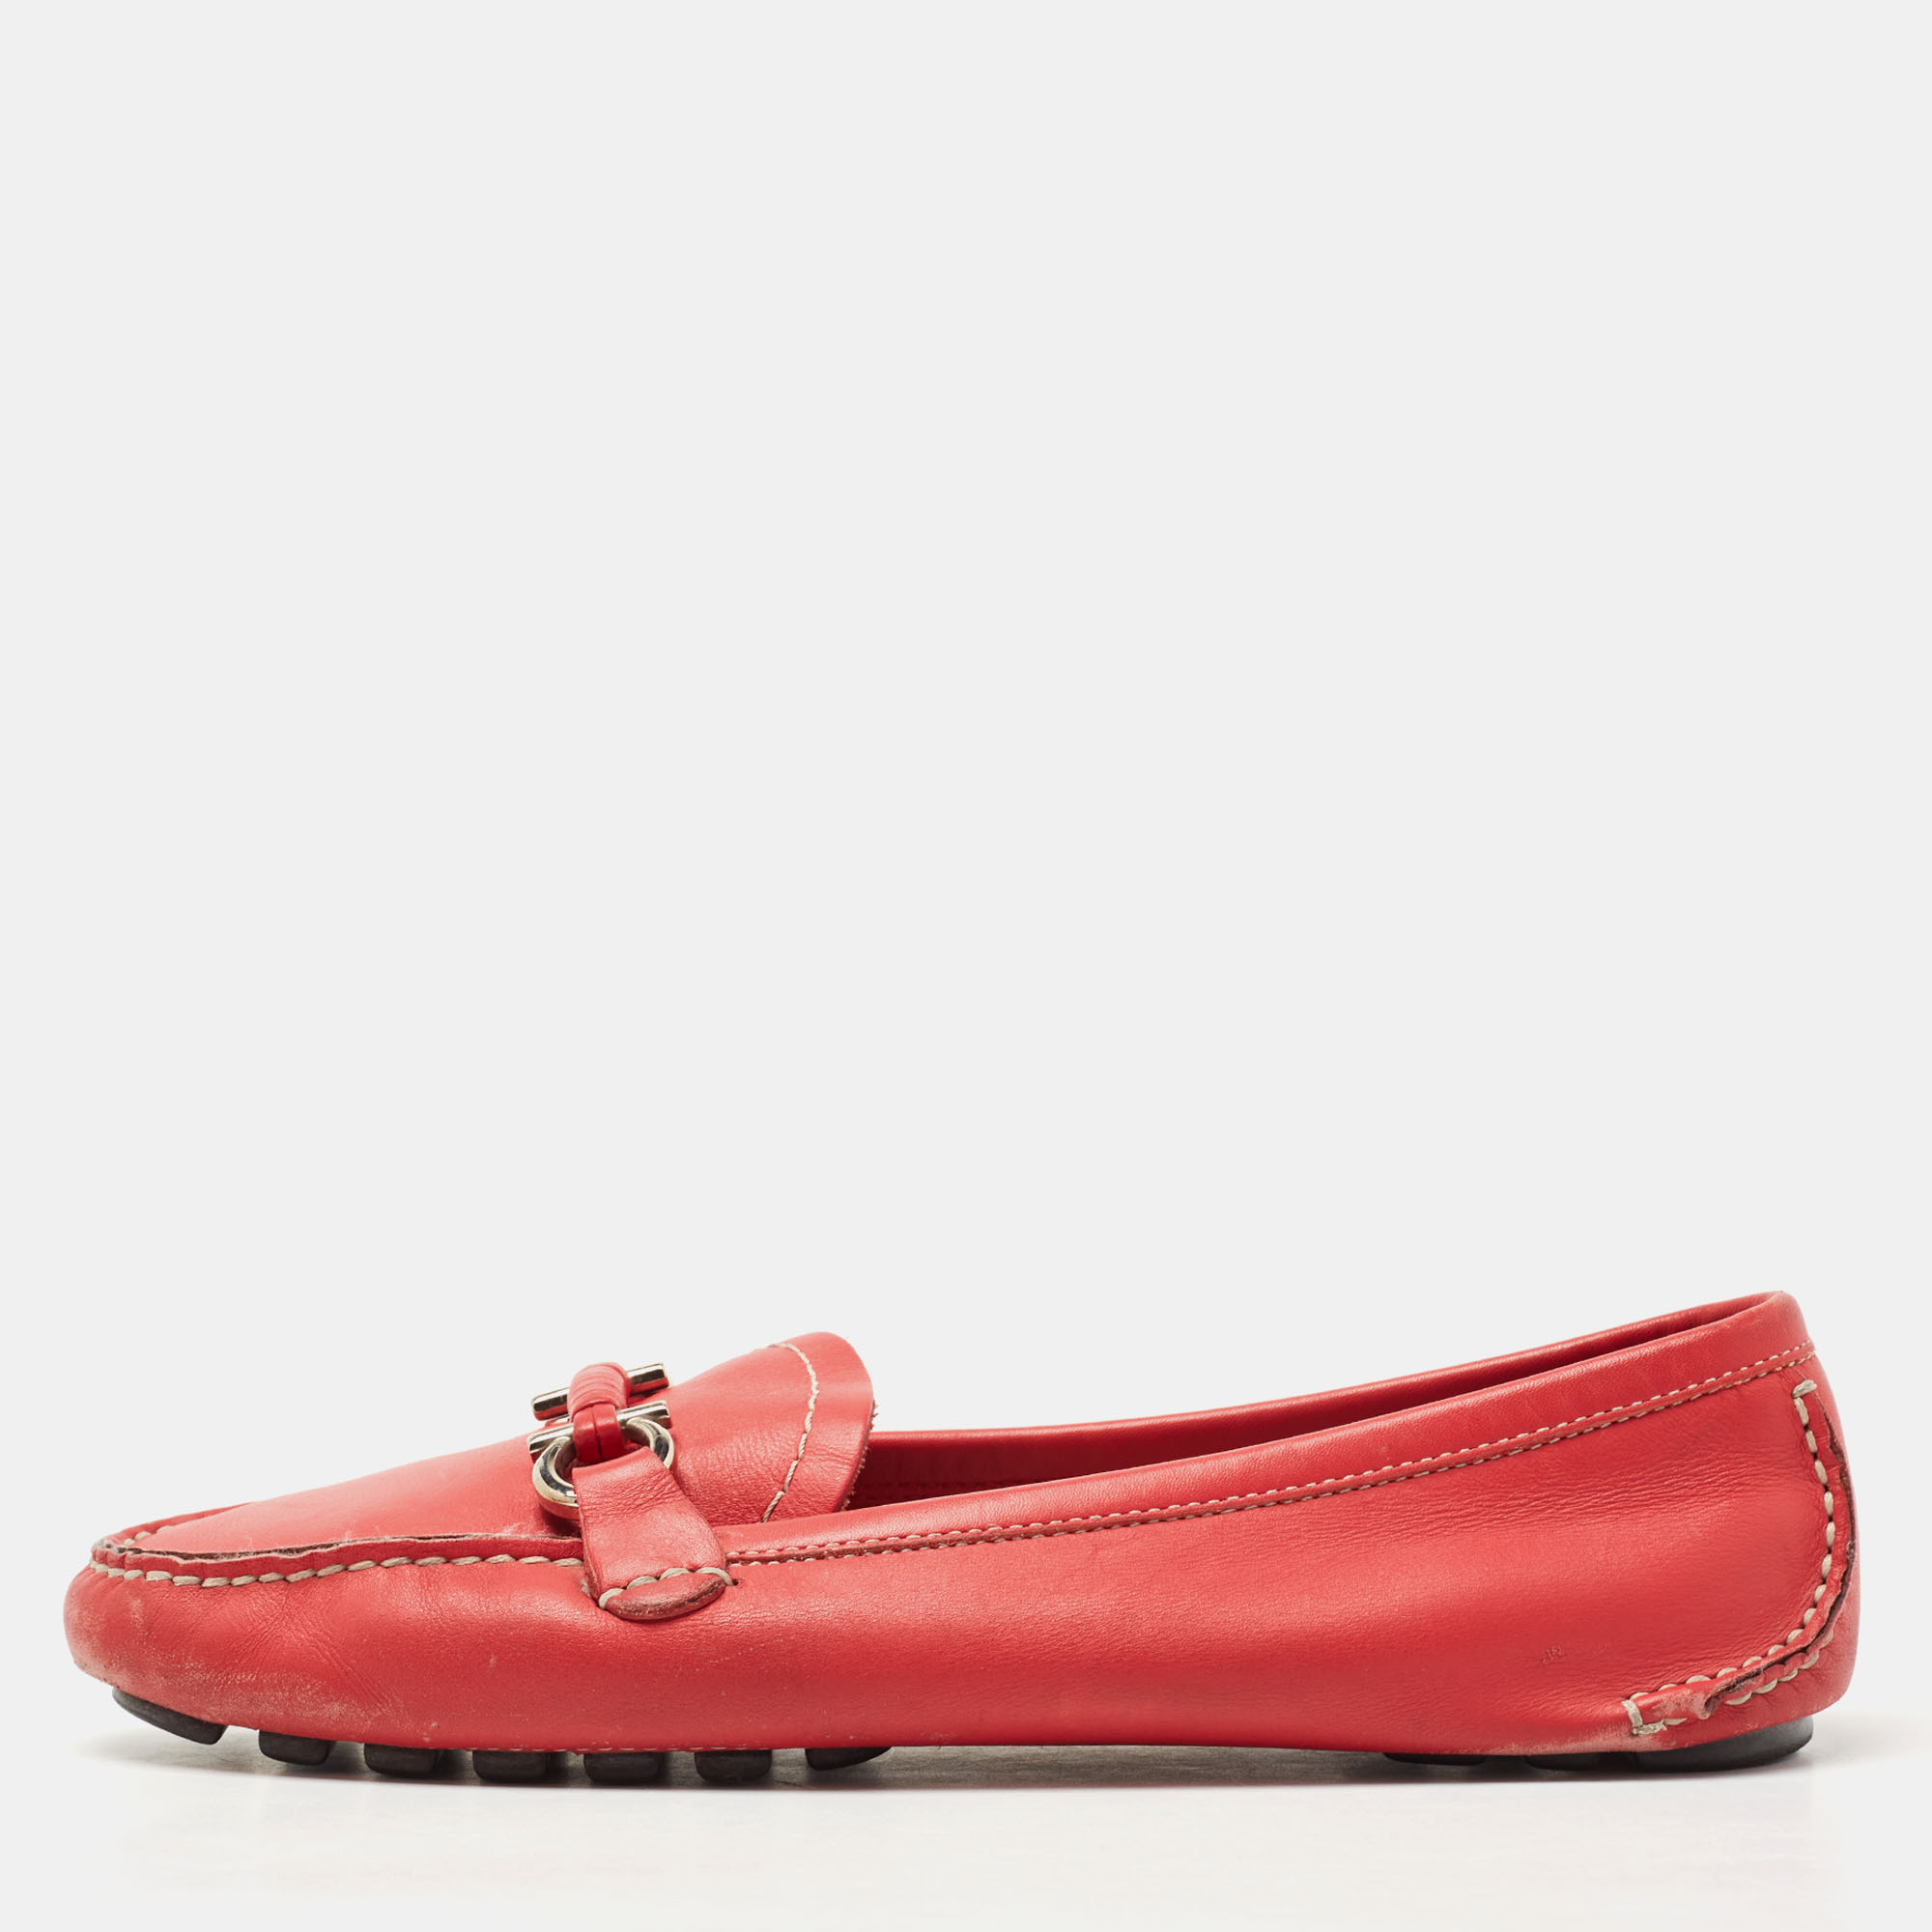 Pre-owned Ferragamo Red Leather Gancini Slip On Loafers Size 37.5